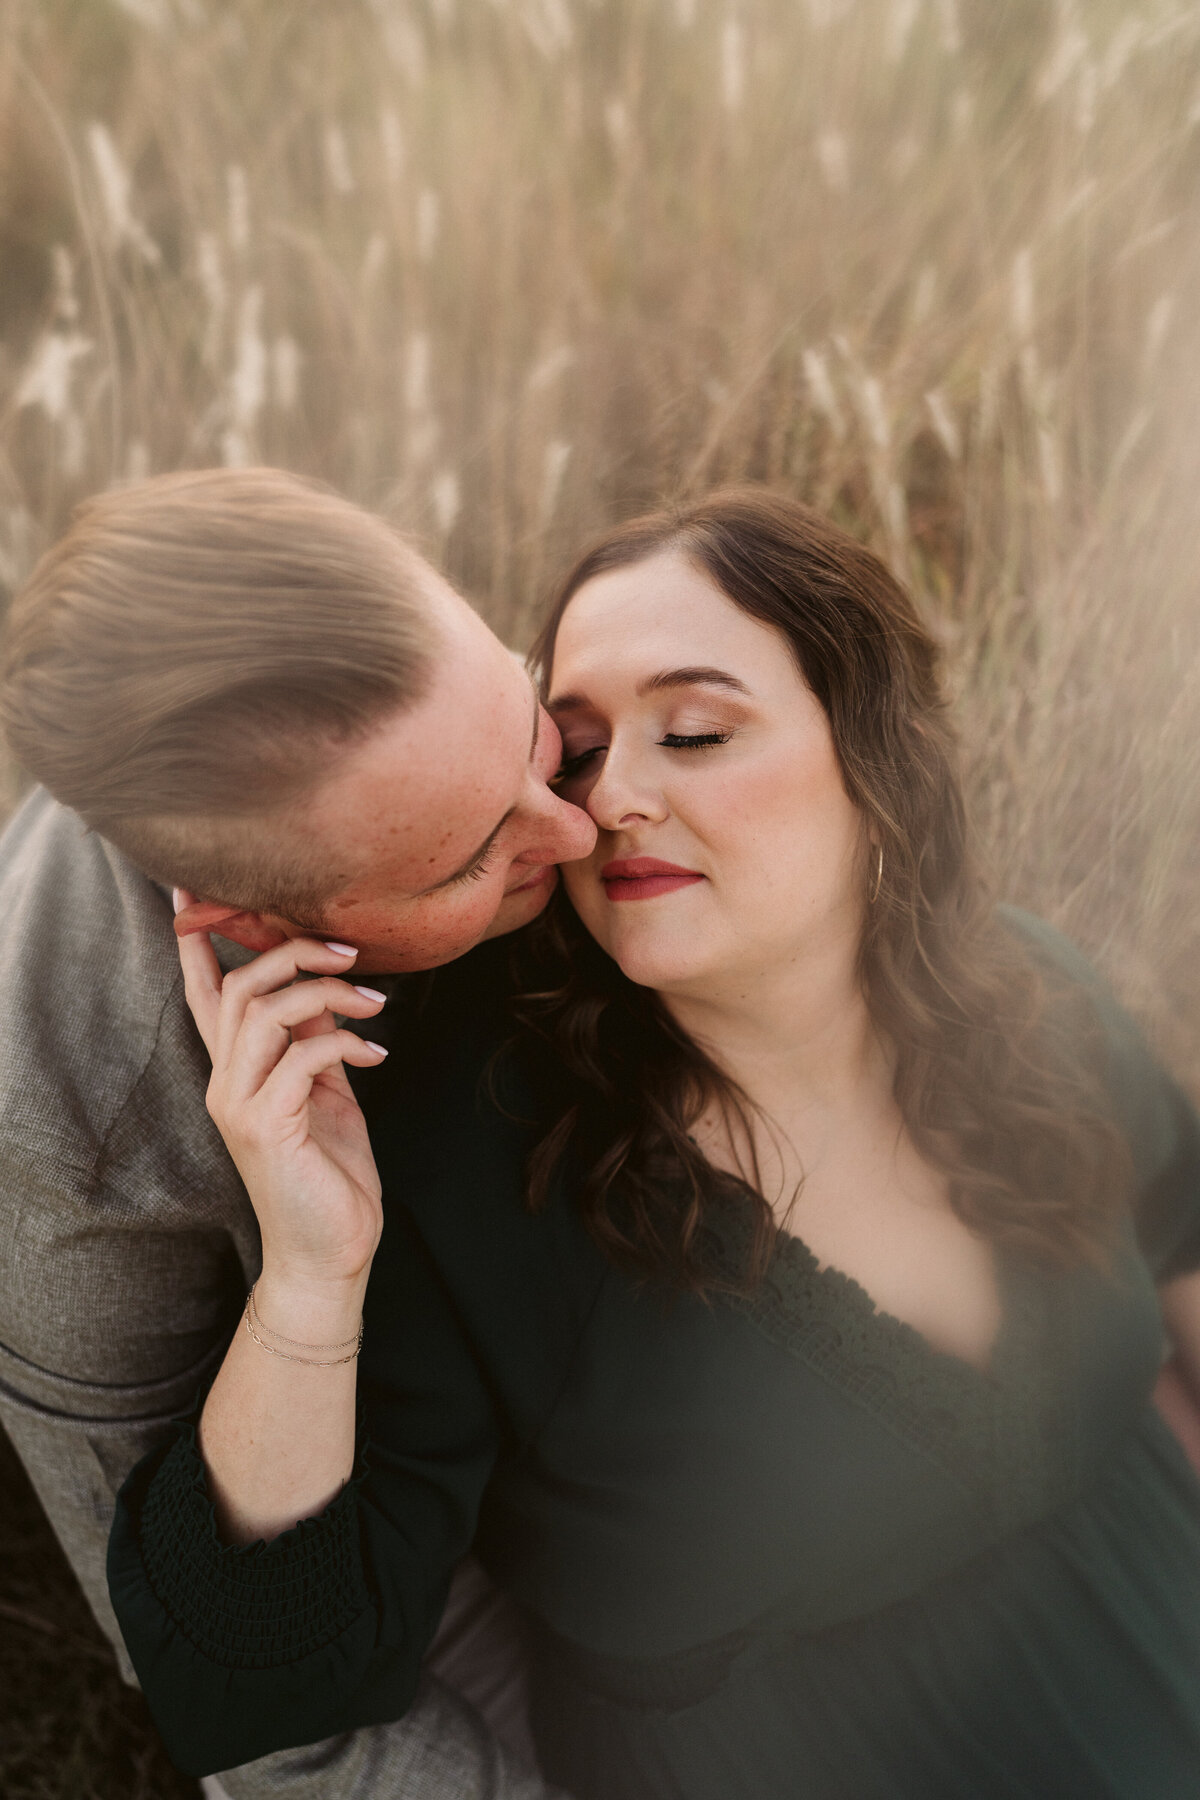 Emily-and-Jordan-engagement-session-at-arbor-hills-plano-by-bruna-kitchen-photography-116